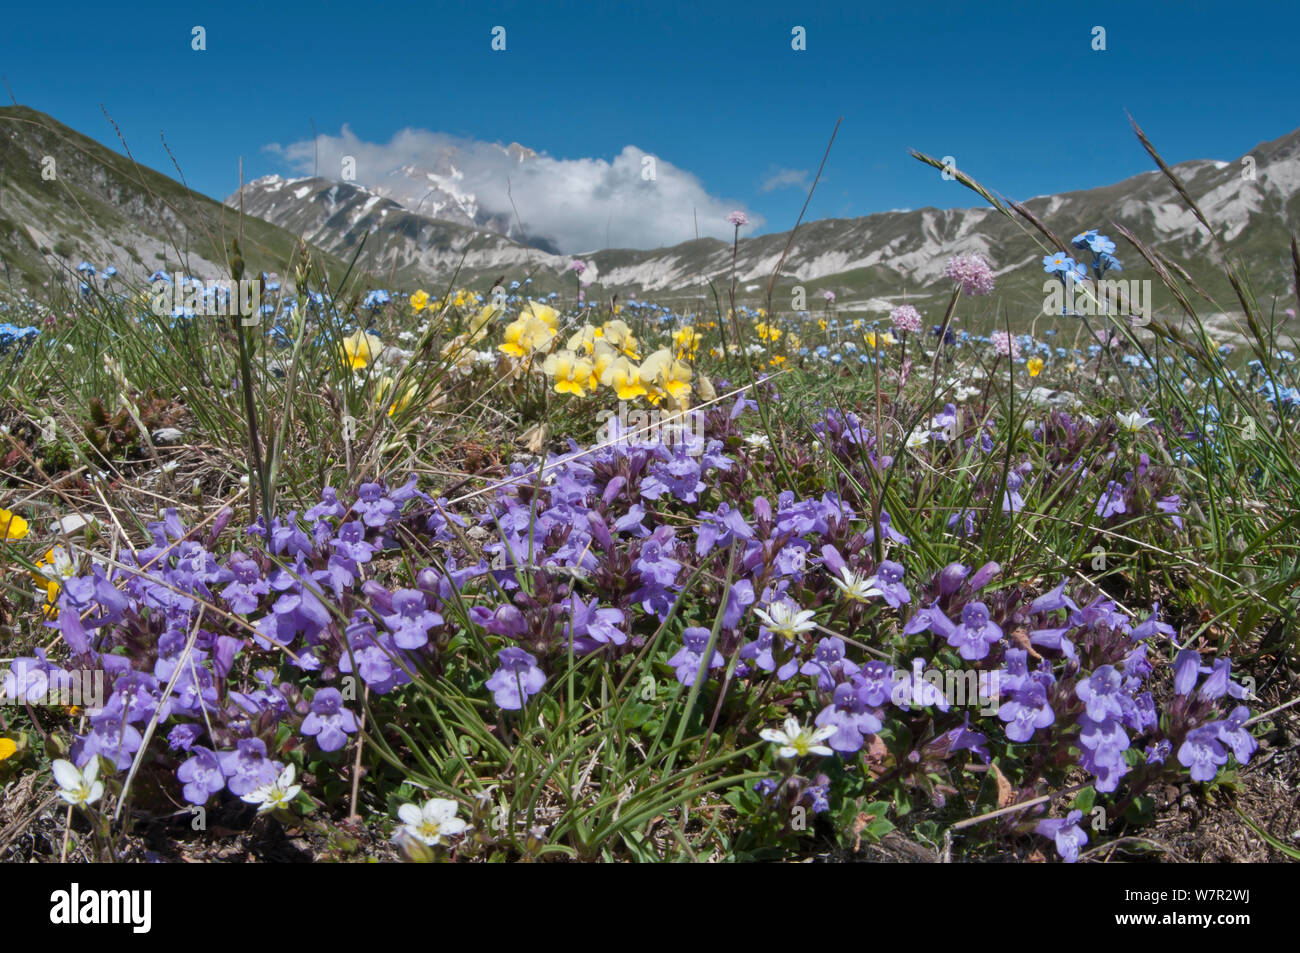 Basil Thyme (Acinos arvensis) with Viola (Viola eugeniae) and Forget-me-nots (Myosotis) Campo Imperatore, Gran Sasso, Appennines, Abruzzo, Italy, May Stock Photo